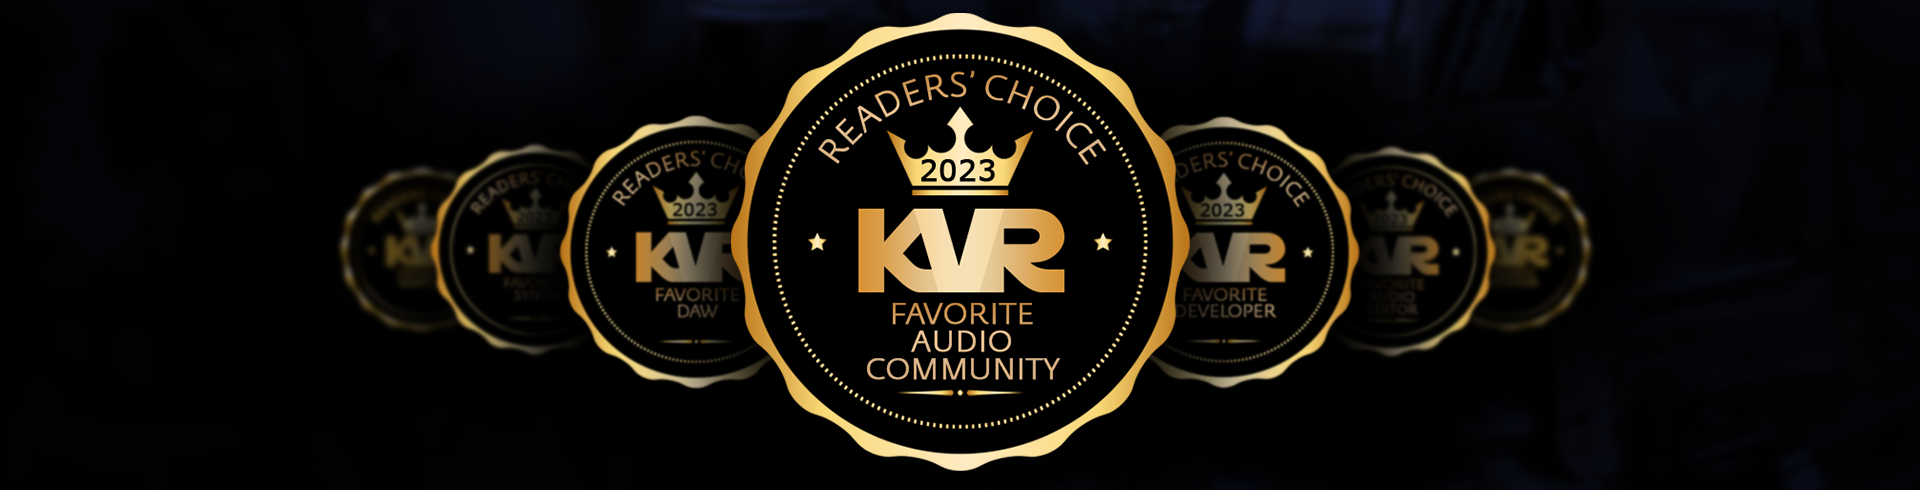 Best Audio and MIDI Software - 2023 KVR Readers' Choice Awards Winners Announced